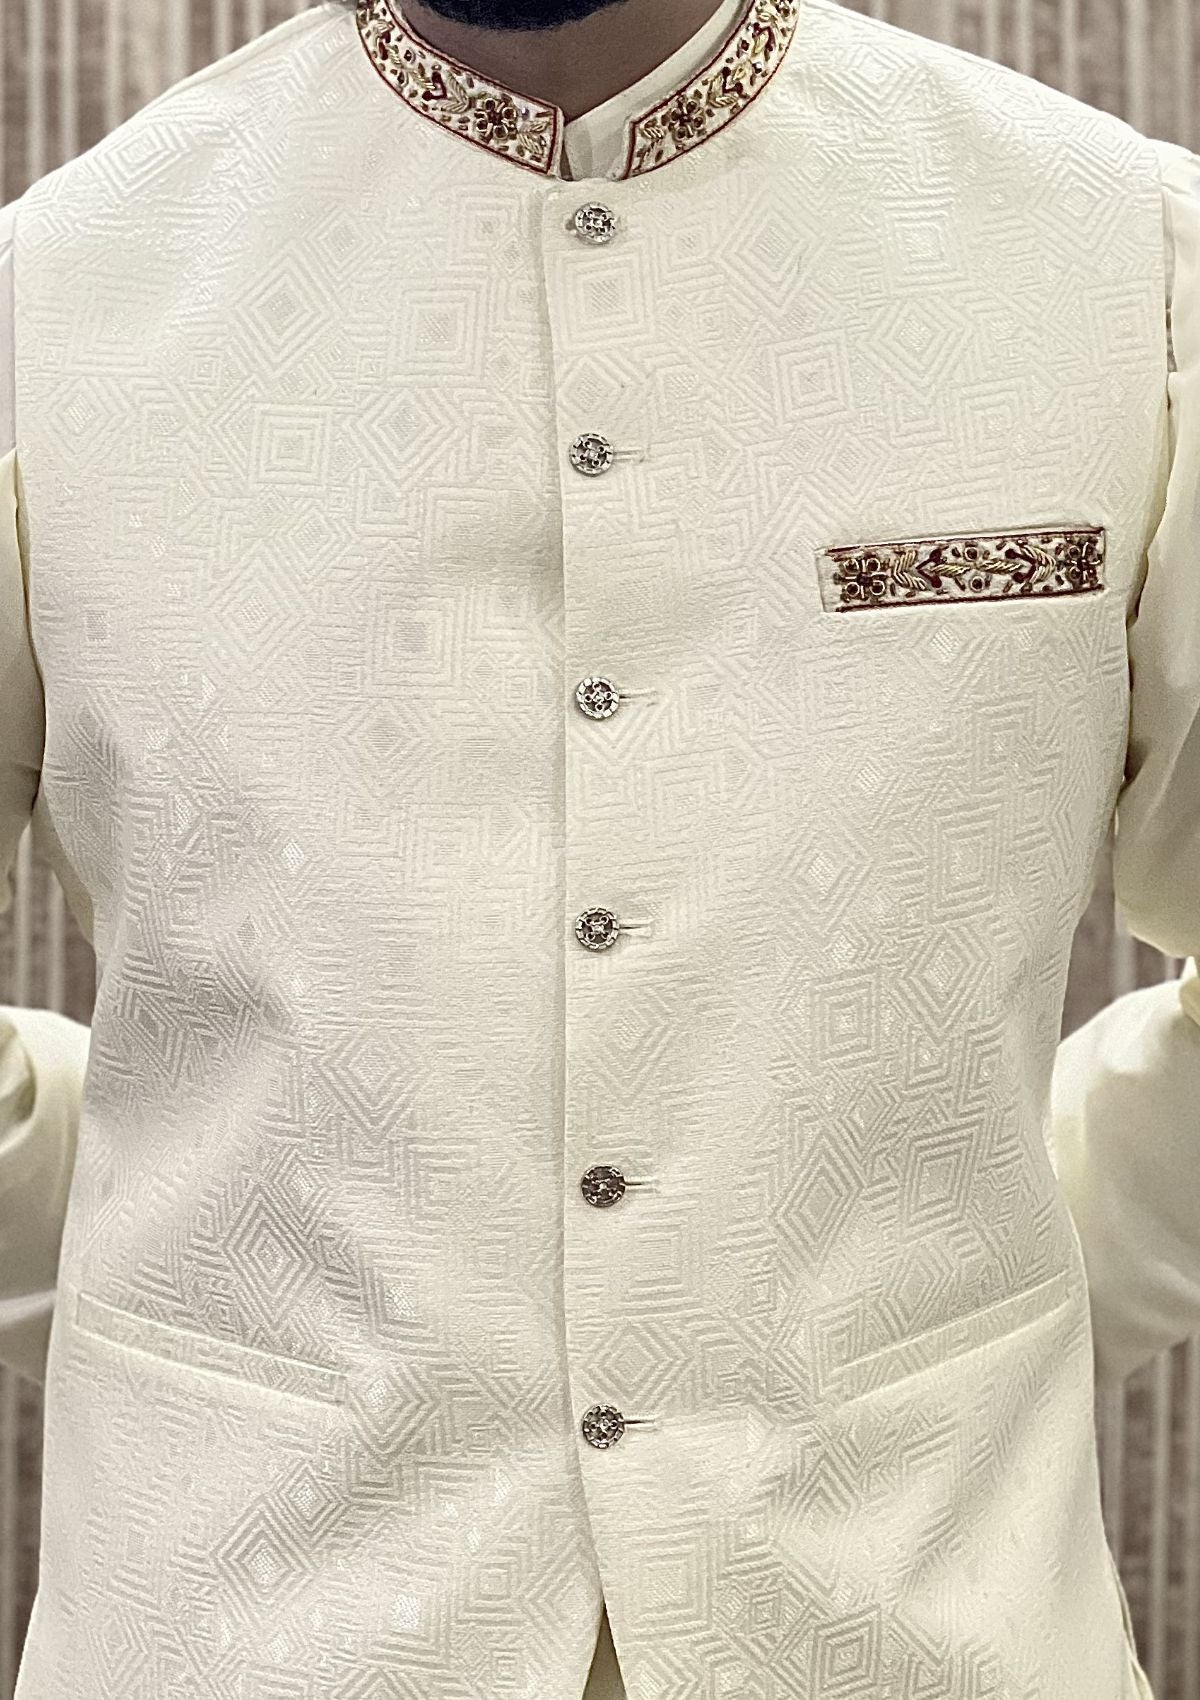 Stitched Collection - T-Mark Apparel - Waistcoat Suit - RWT - 1200